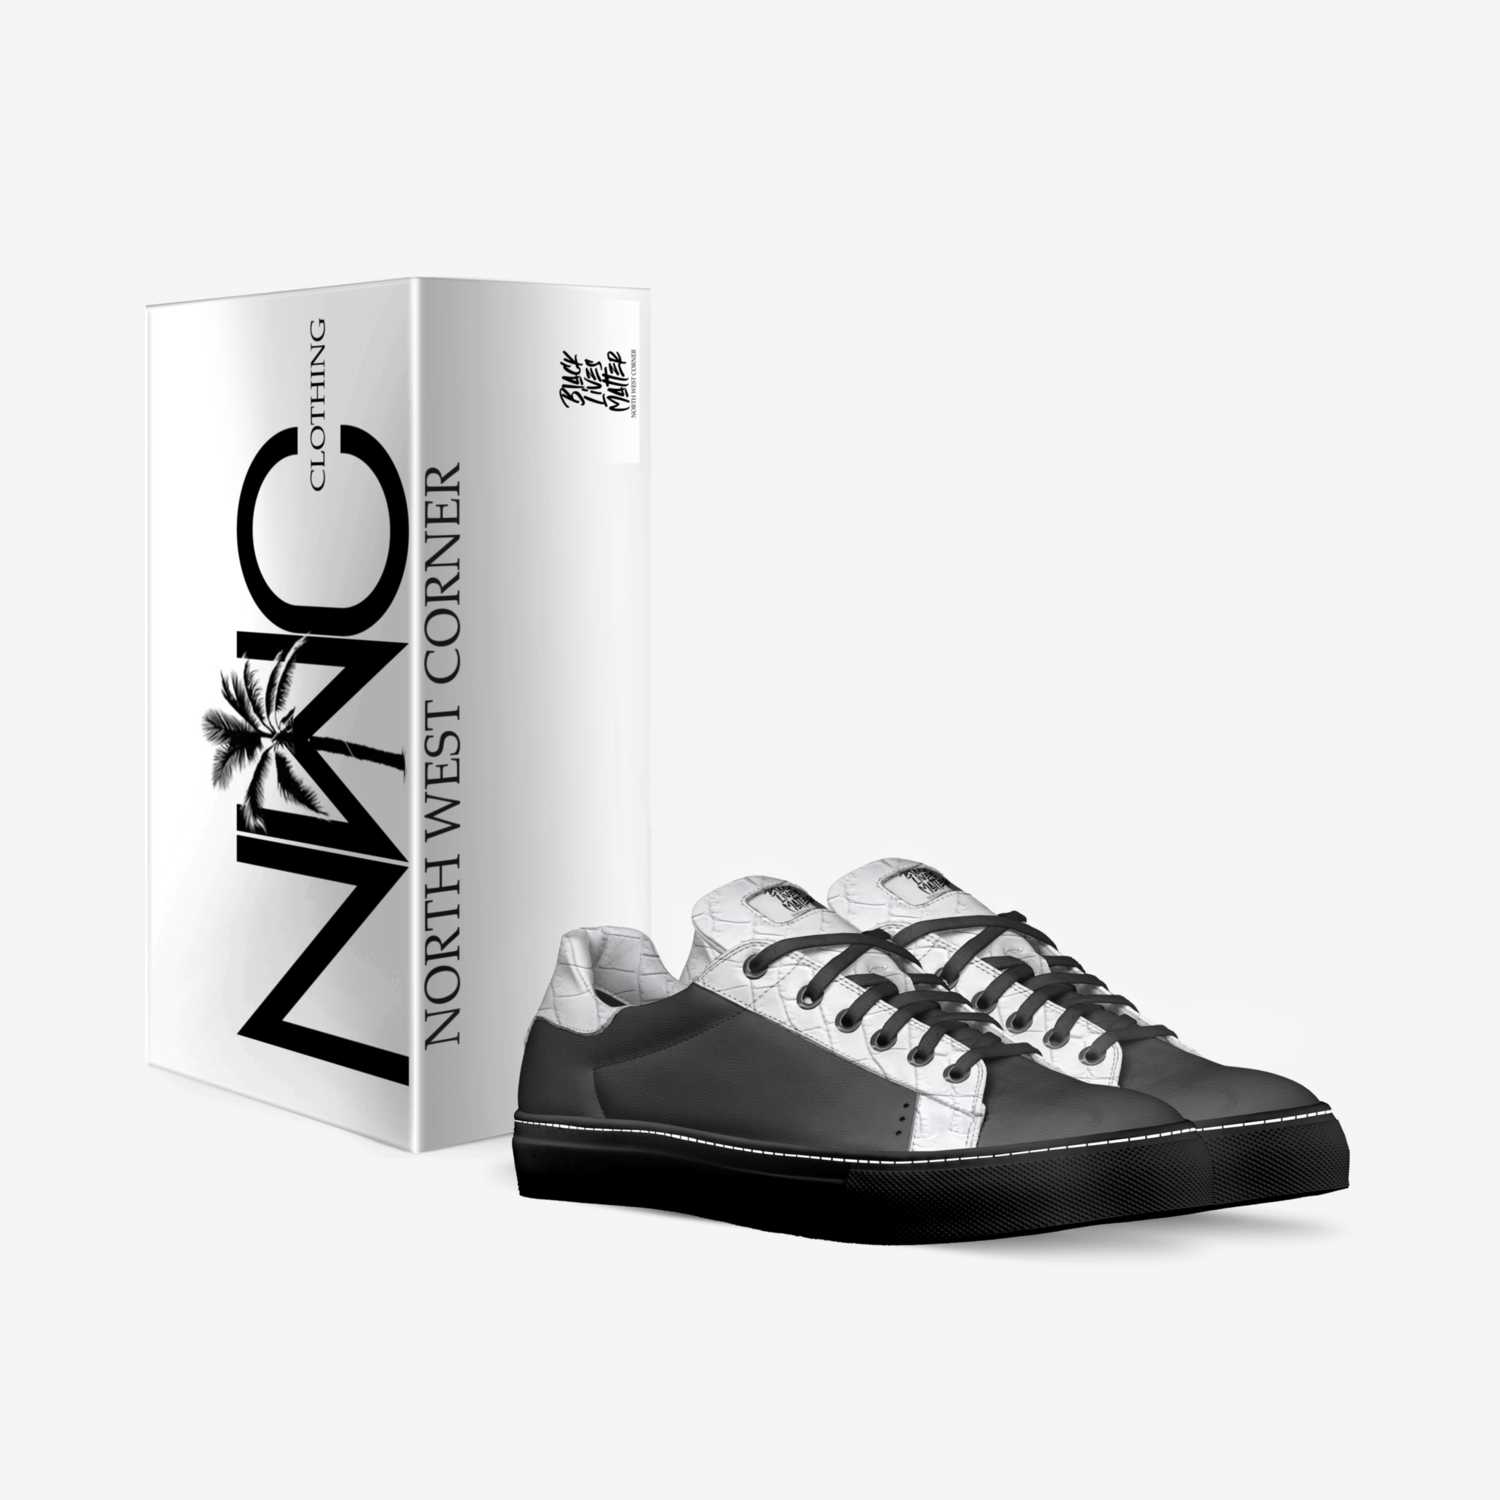 North West Corner custom made in Italy shoes by Ansar Muhammad | Box view